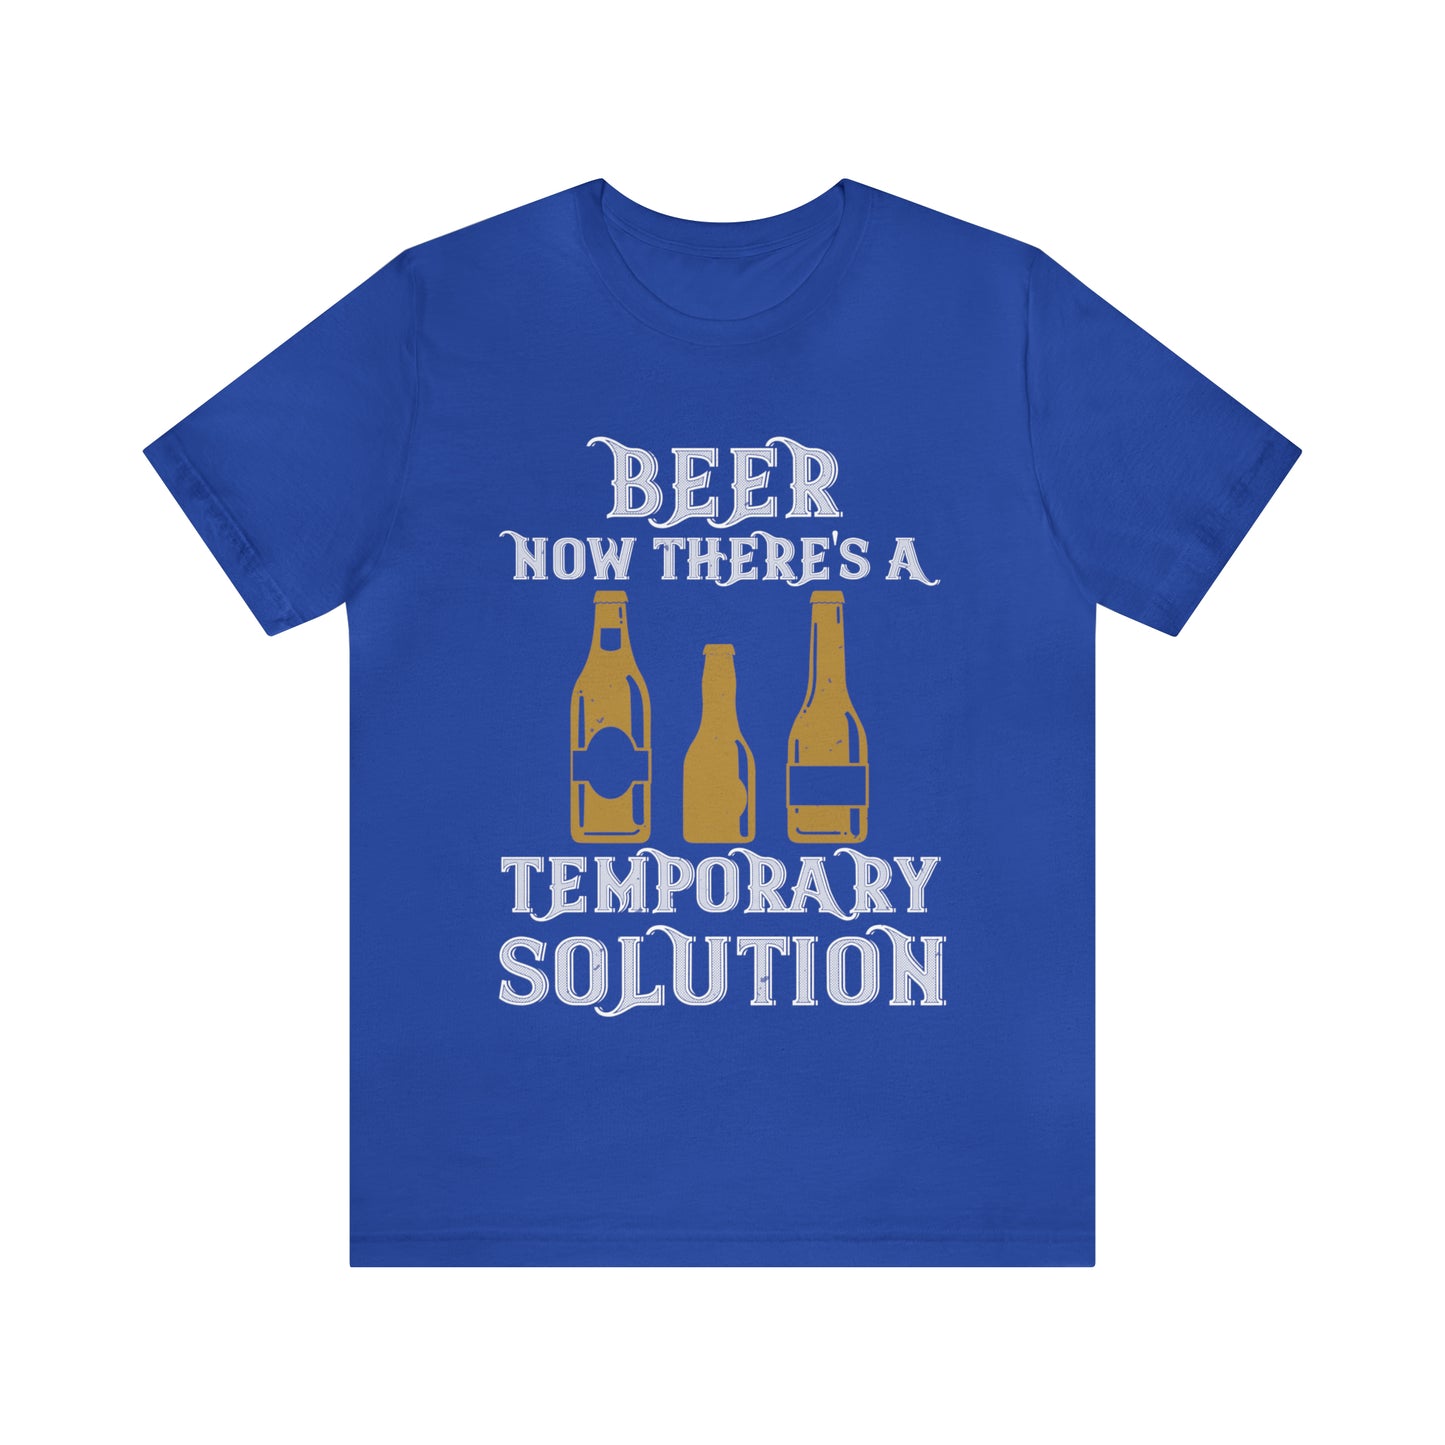 Beer. Now There's A Temporary Solution - Unisex T-Shirt